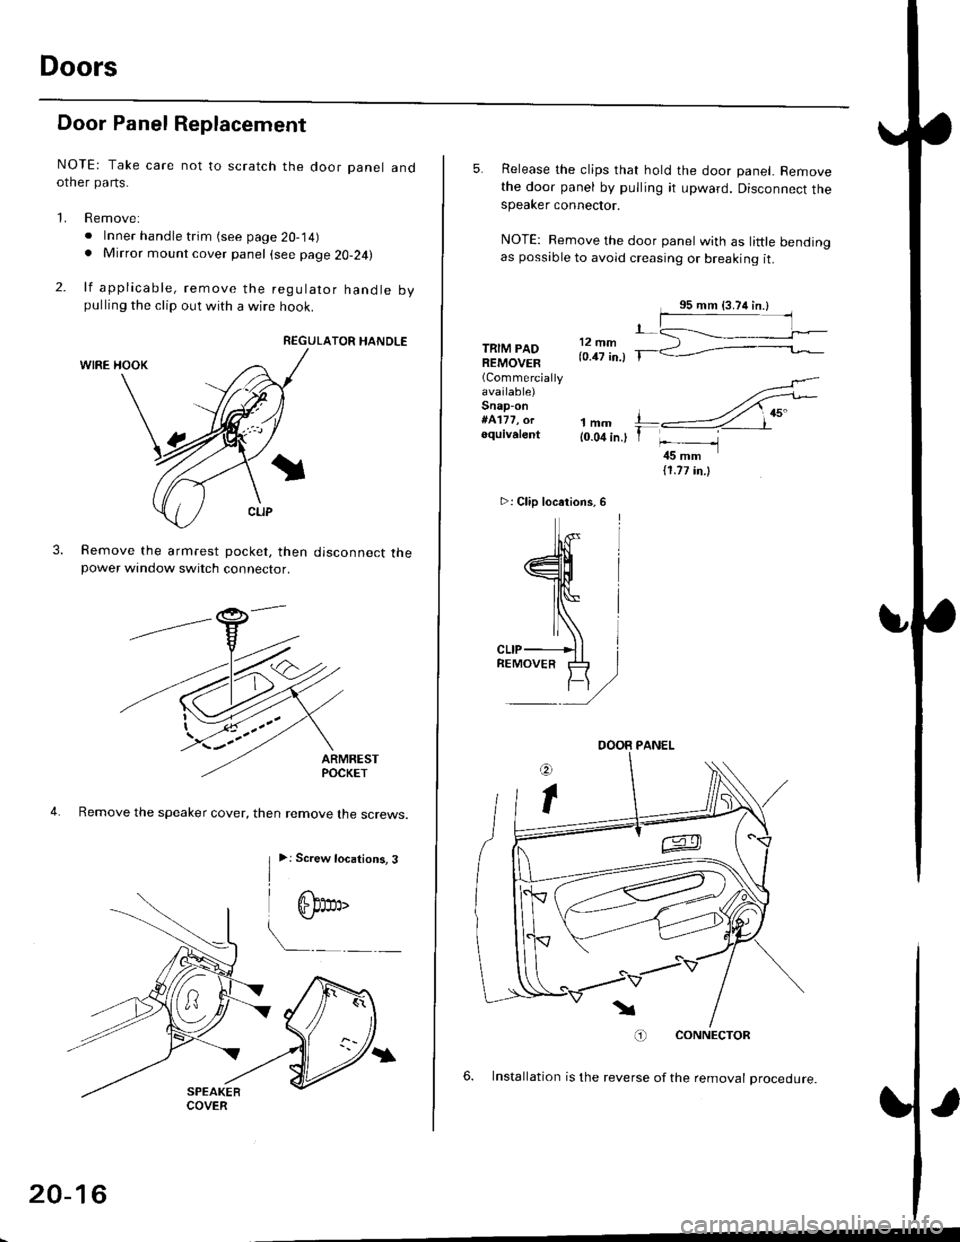 HONDA CIVIC 1997 6.G Workshop Manual Doors
Door Panel Replacement
NOTE: Take care not to scratch the door panel andother pa rts.
1. Remove:
. Inner handle trim (see page 20-14). Mirror mount cover panel (see page 20-24)
2. lf applicable